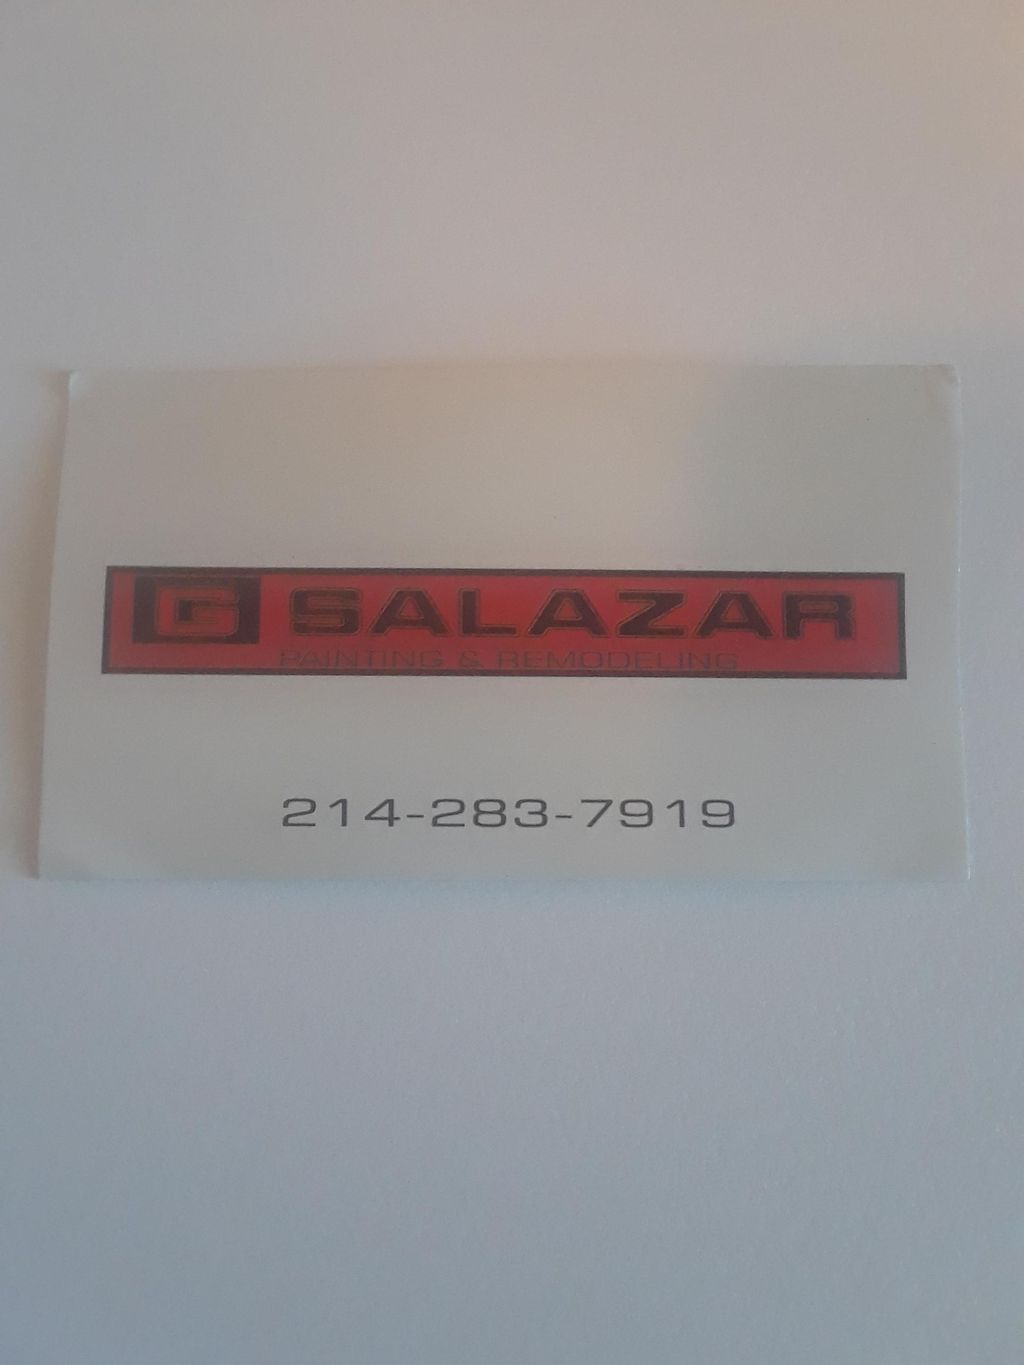 Gsalazar Painting and Remodeling